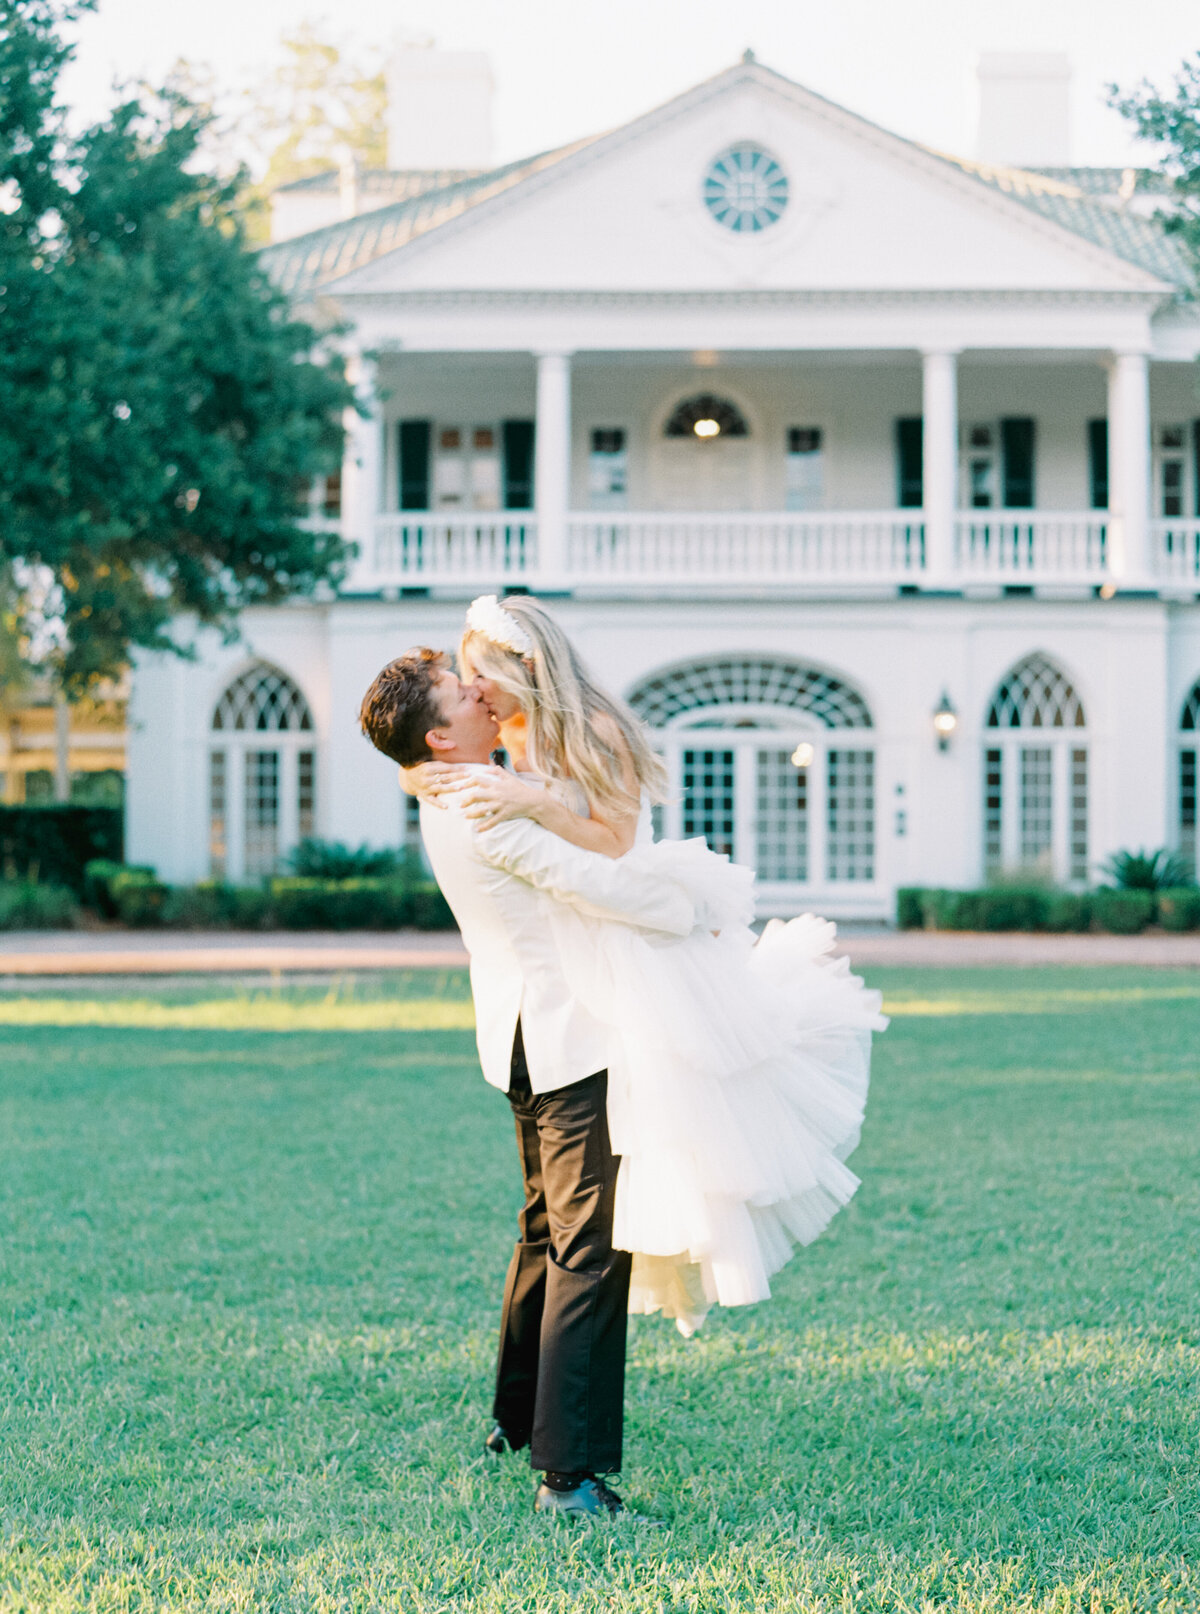 This interior designers wedding at Lowndes Grove is a must-see! Golden sunset light with groom picking up bride for a kiss. Charleston destination wedding photographer.